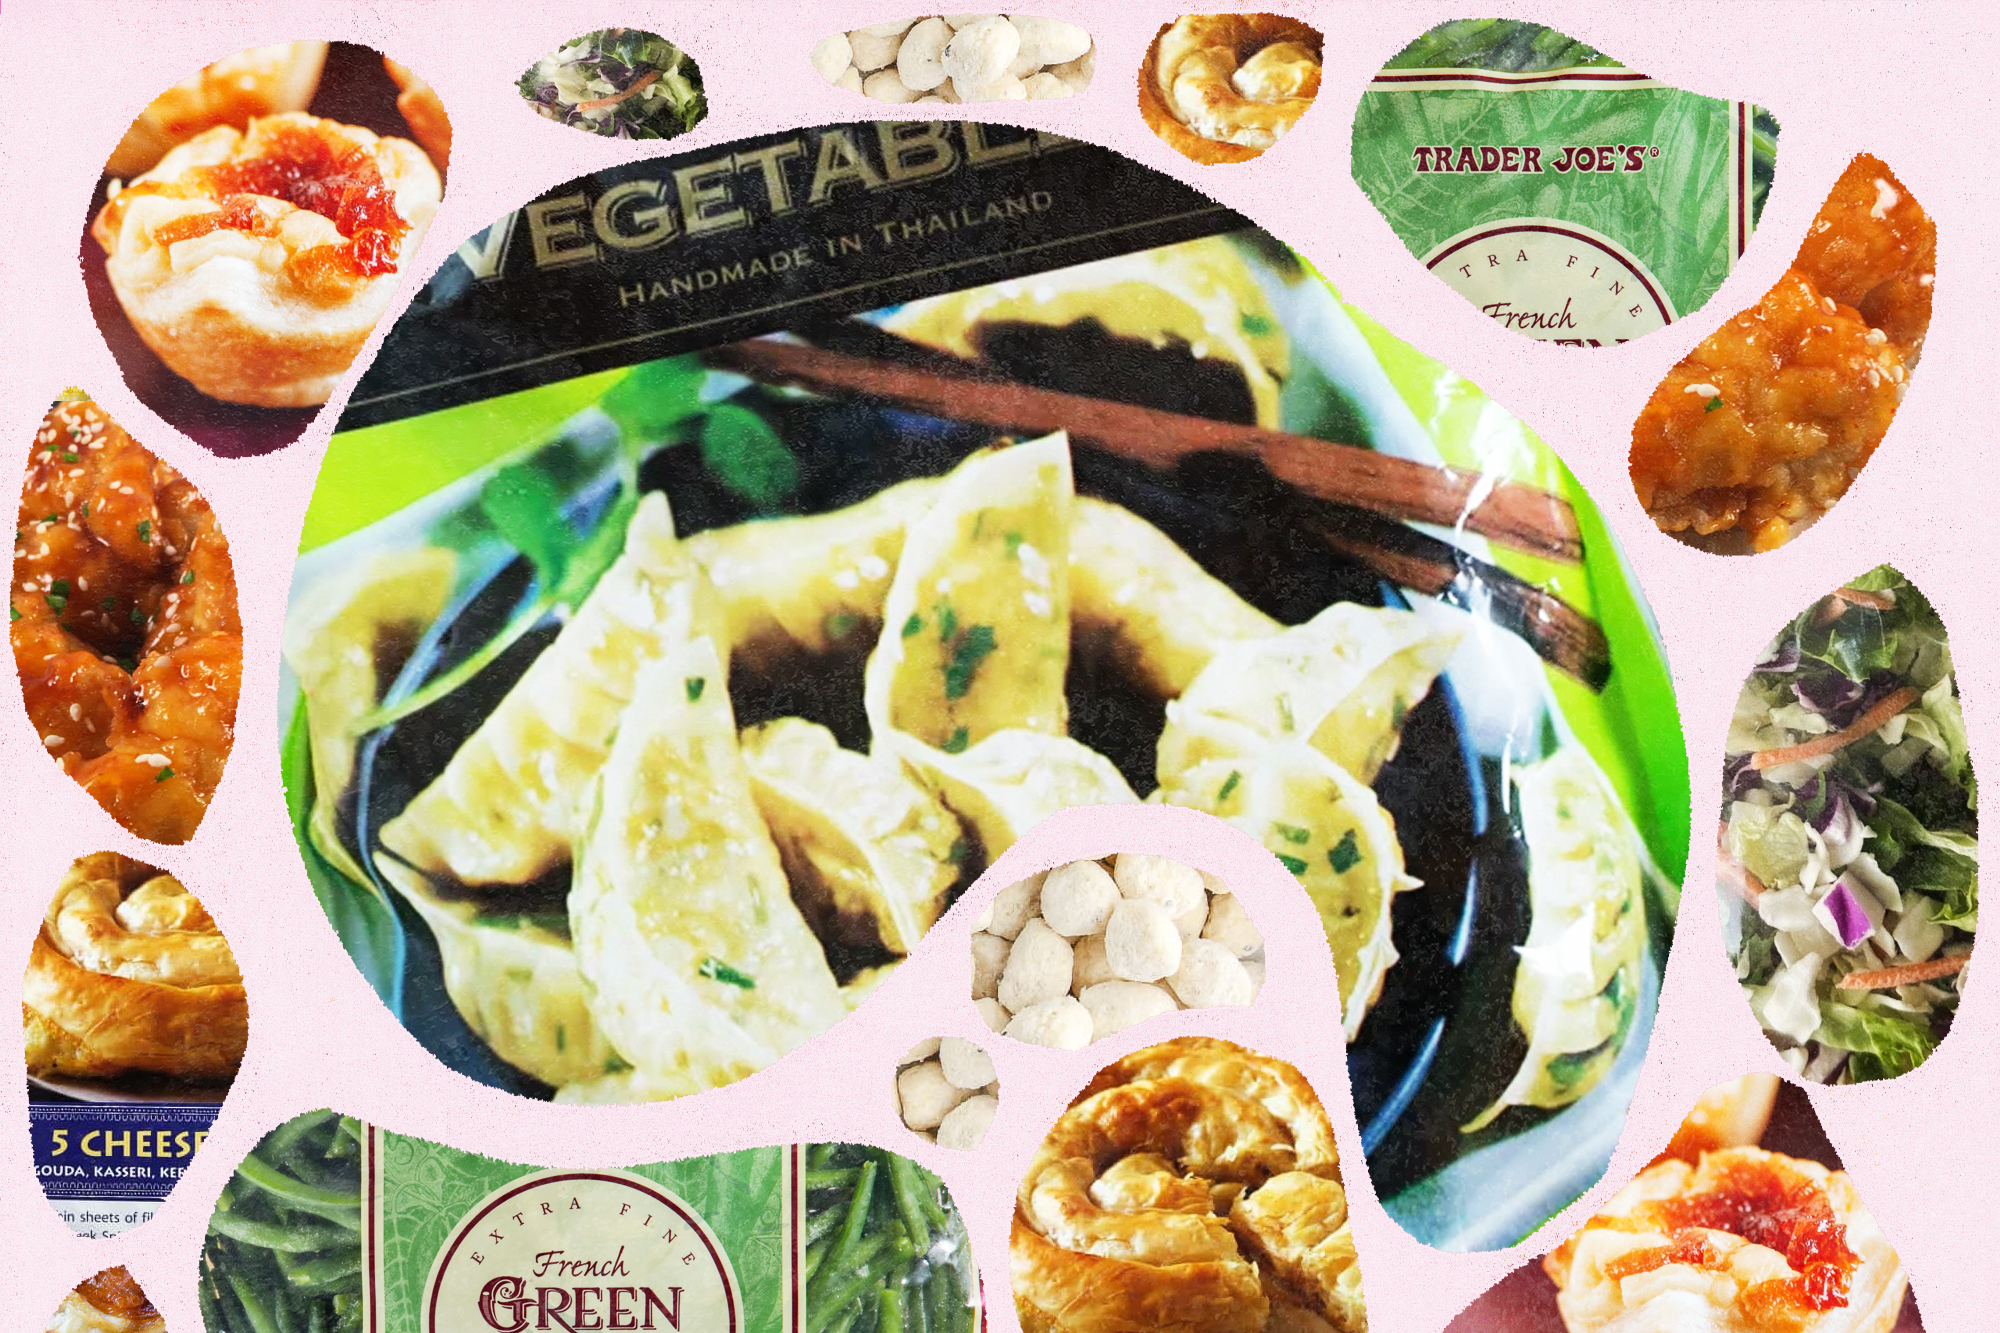 Snippets of the packaging from different Trader Joe’s frozen foods. Collage illustration.